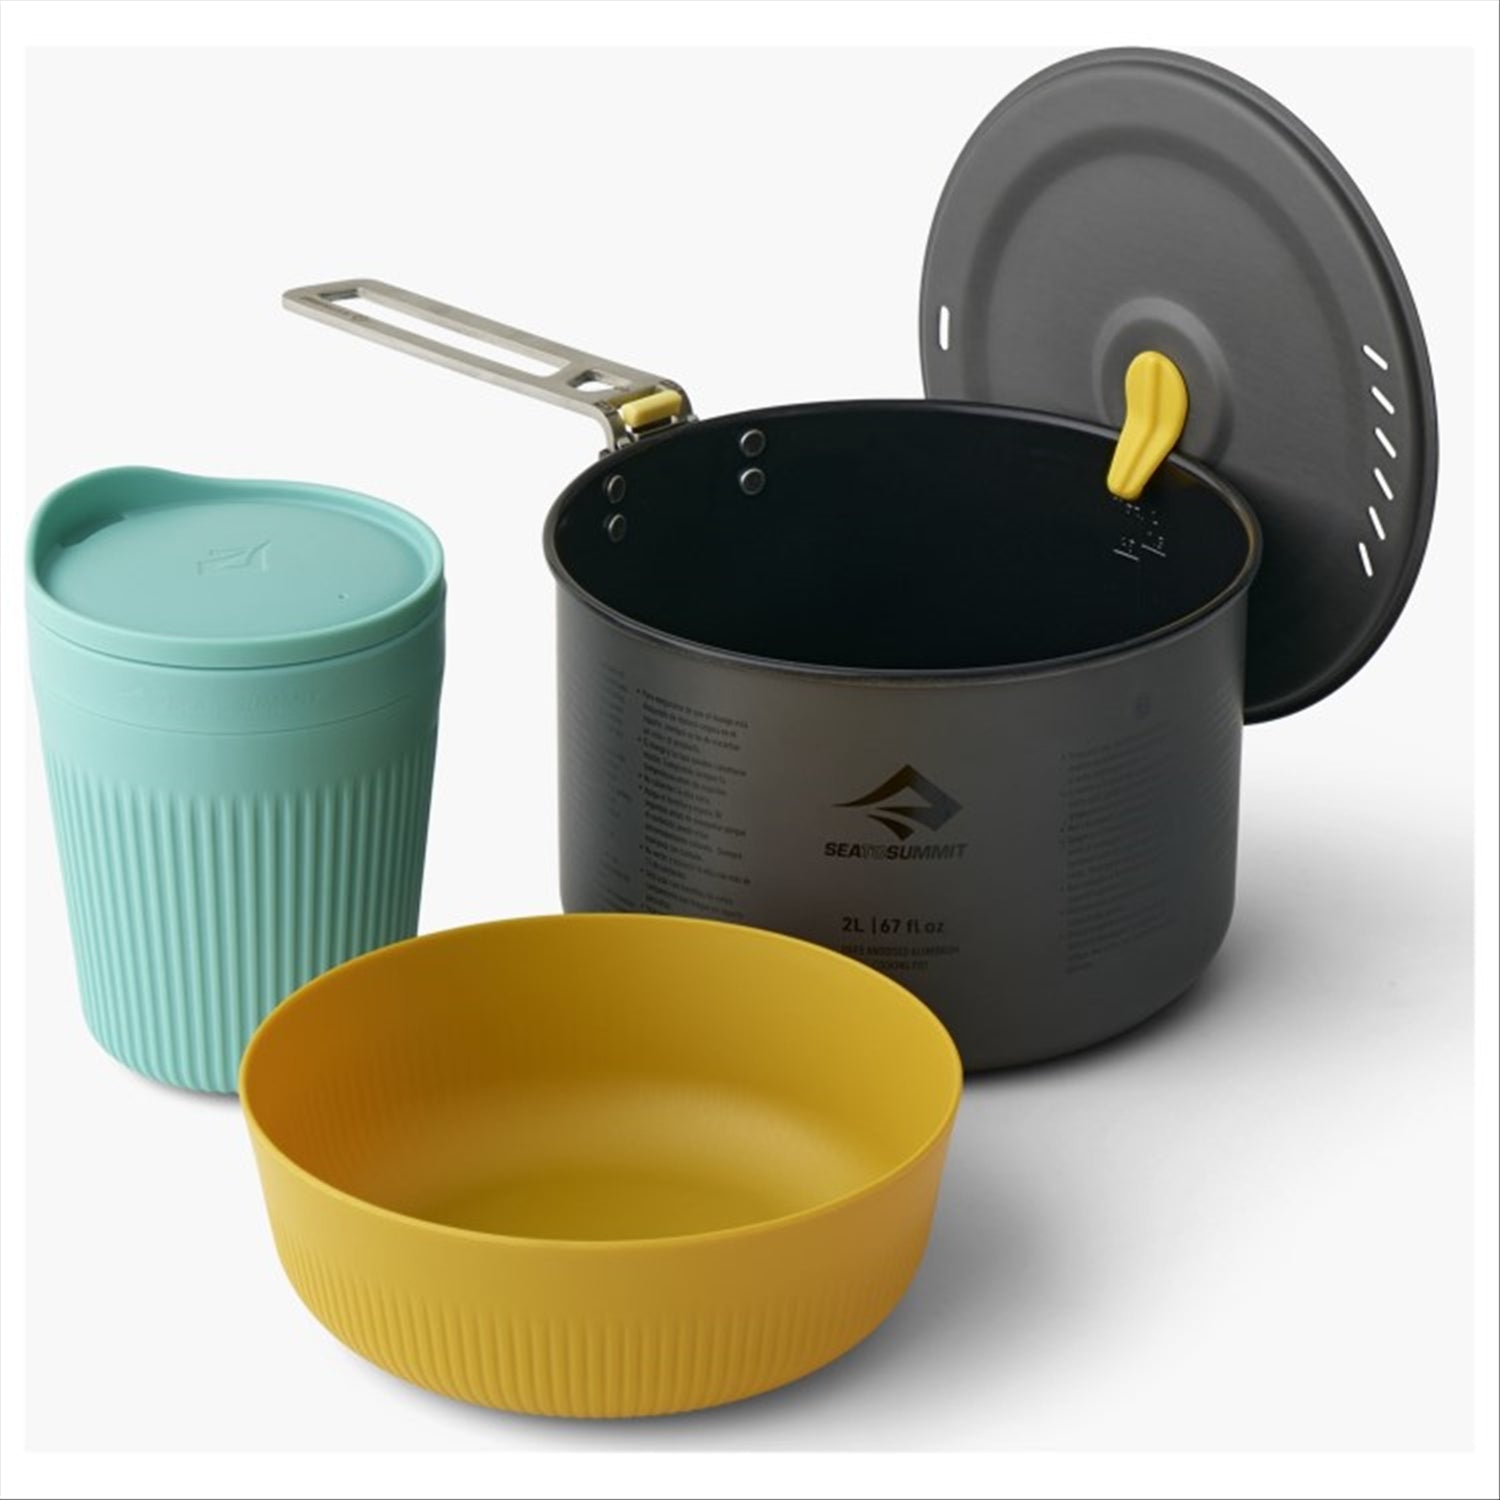 Sea to Summit Sea To Summit Frontier One Pot Cook Set - 1P - 3 Piece